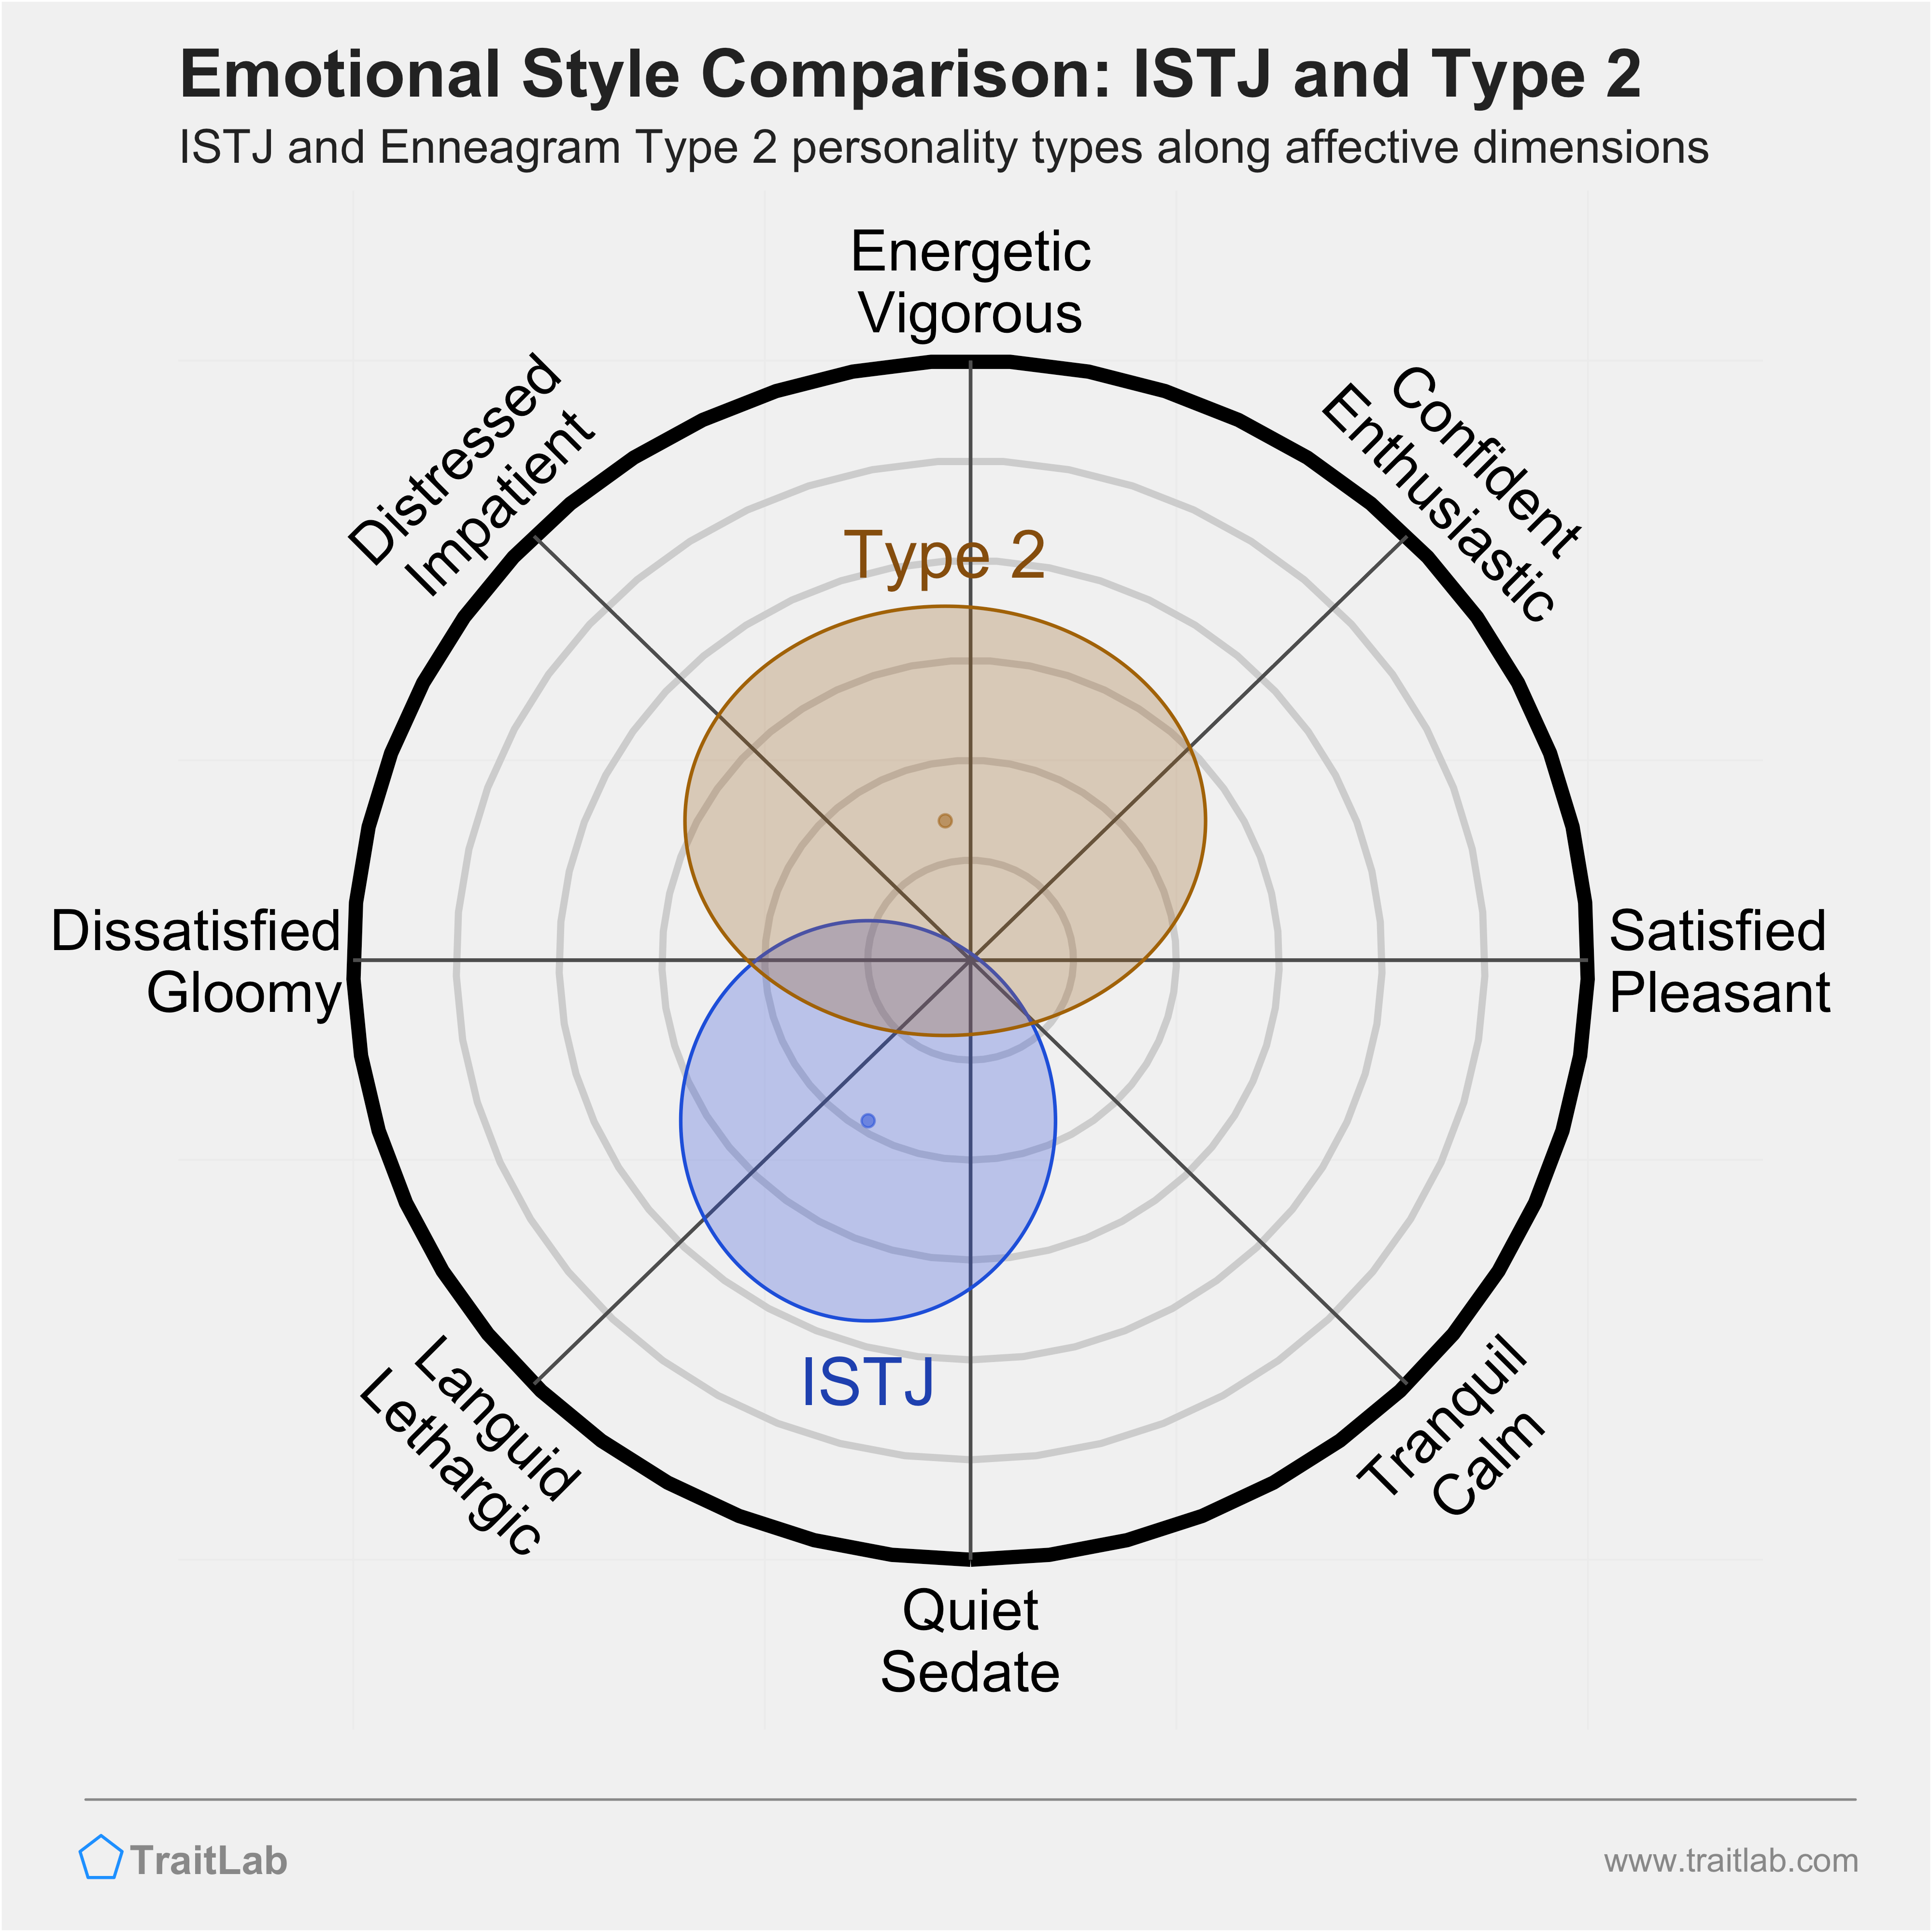 ISTJ and Type 2 comparison across emotional (affective) dimensions